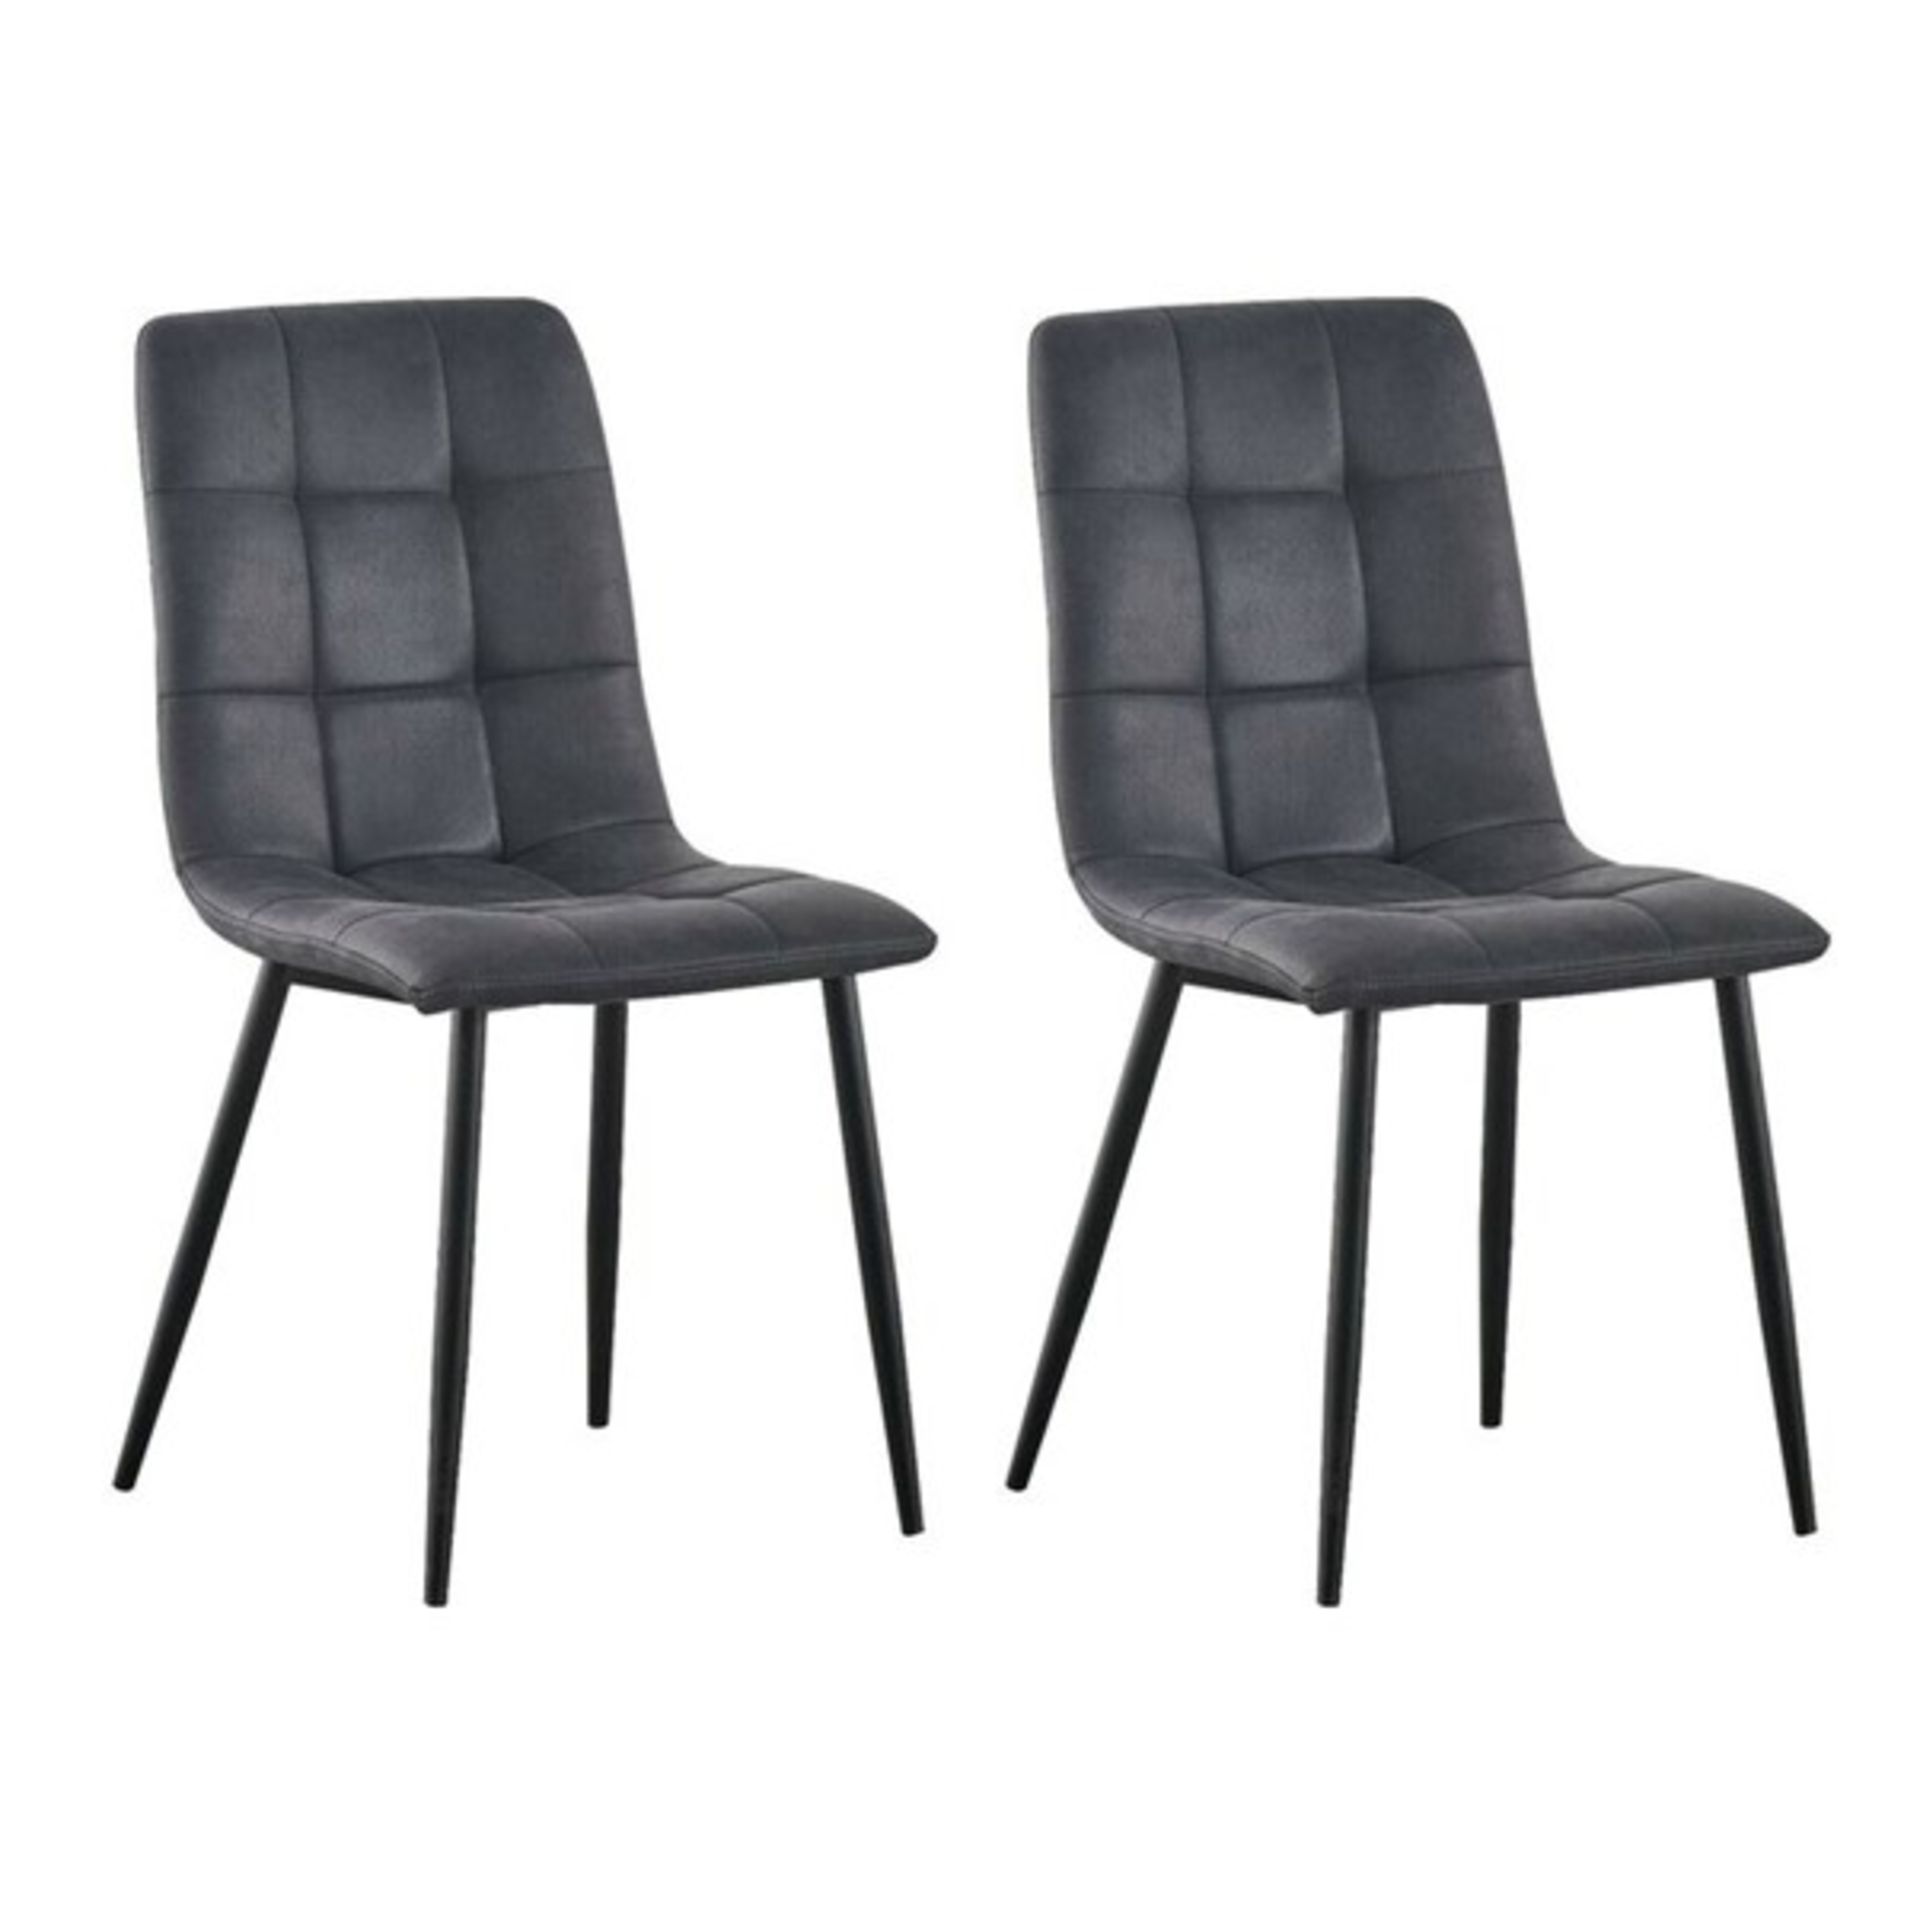 RRP £119.99 - Aliasa Tufted Upholstered Side Chair (Set of 2) - 88cm H x 43cm W x 54cm D